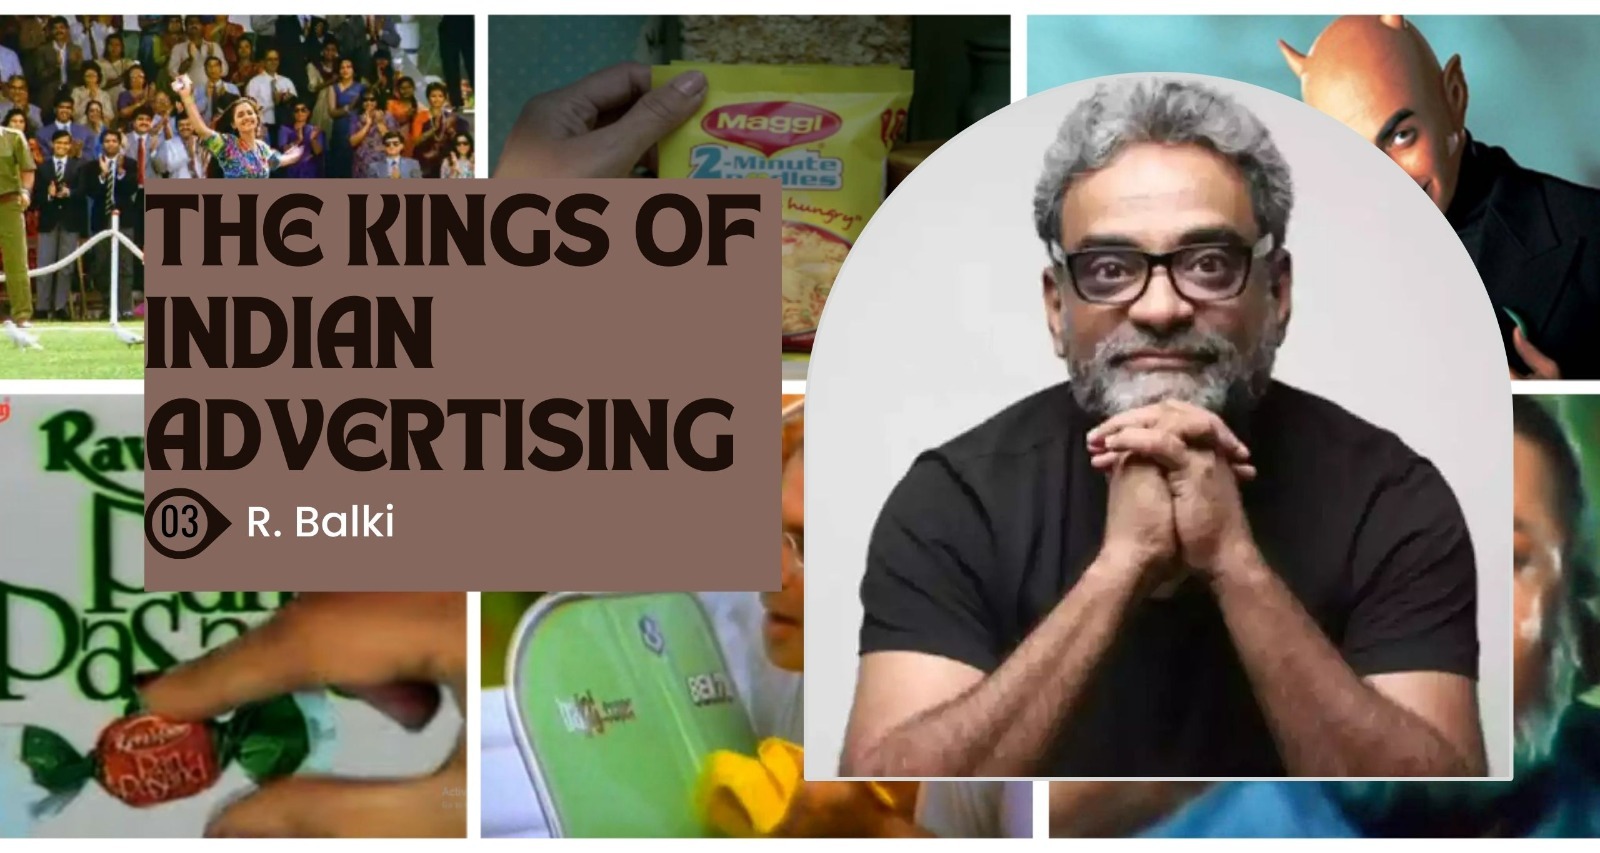 The Kings of Indian Advertising Part III